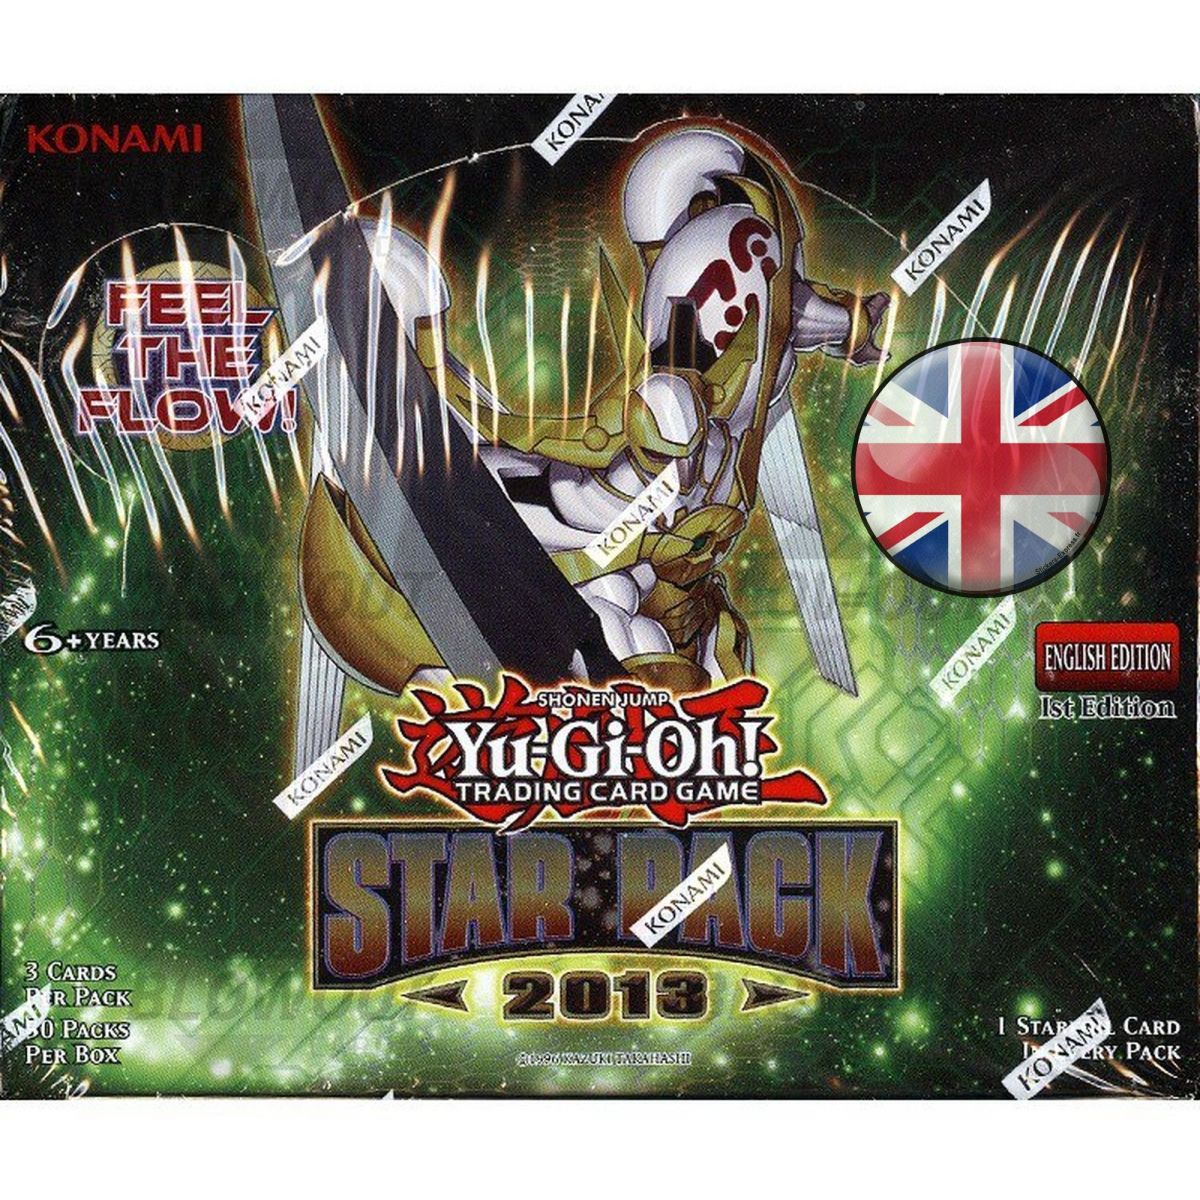 Item Yu Gi Oh! - Display - Box of 50 Boosters - Star Pack 2013 - English - 1st Edition